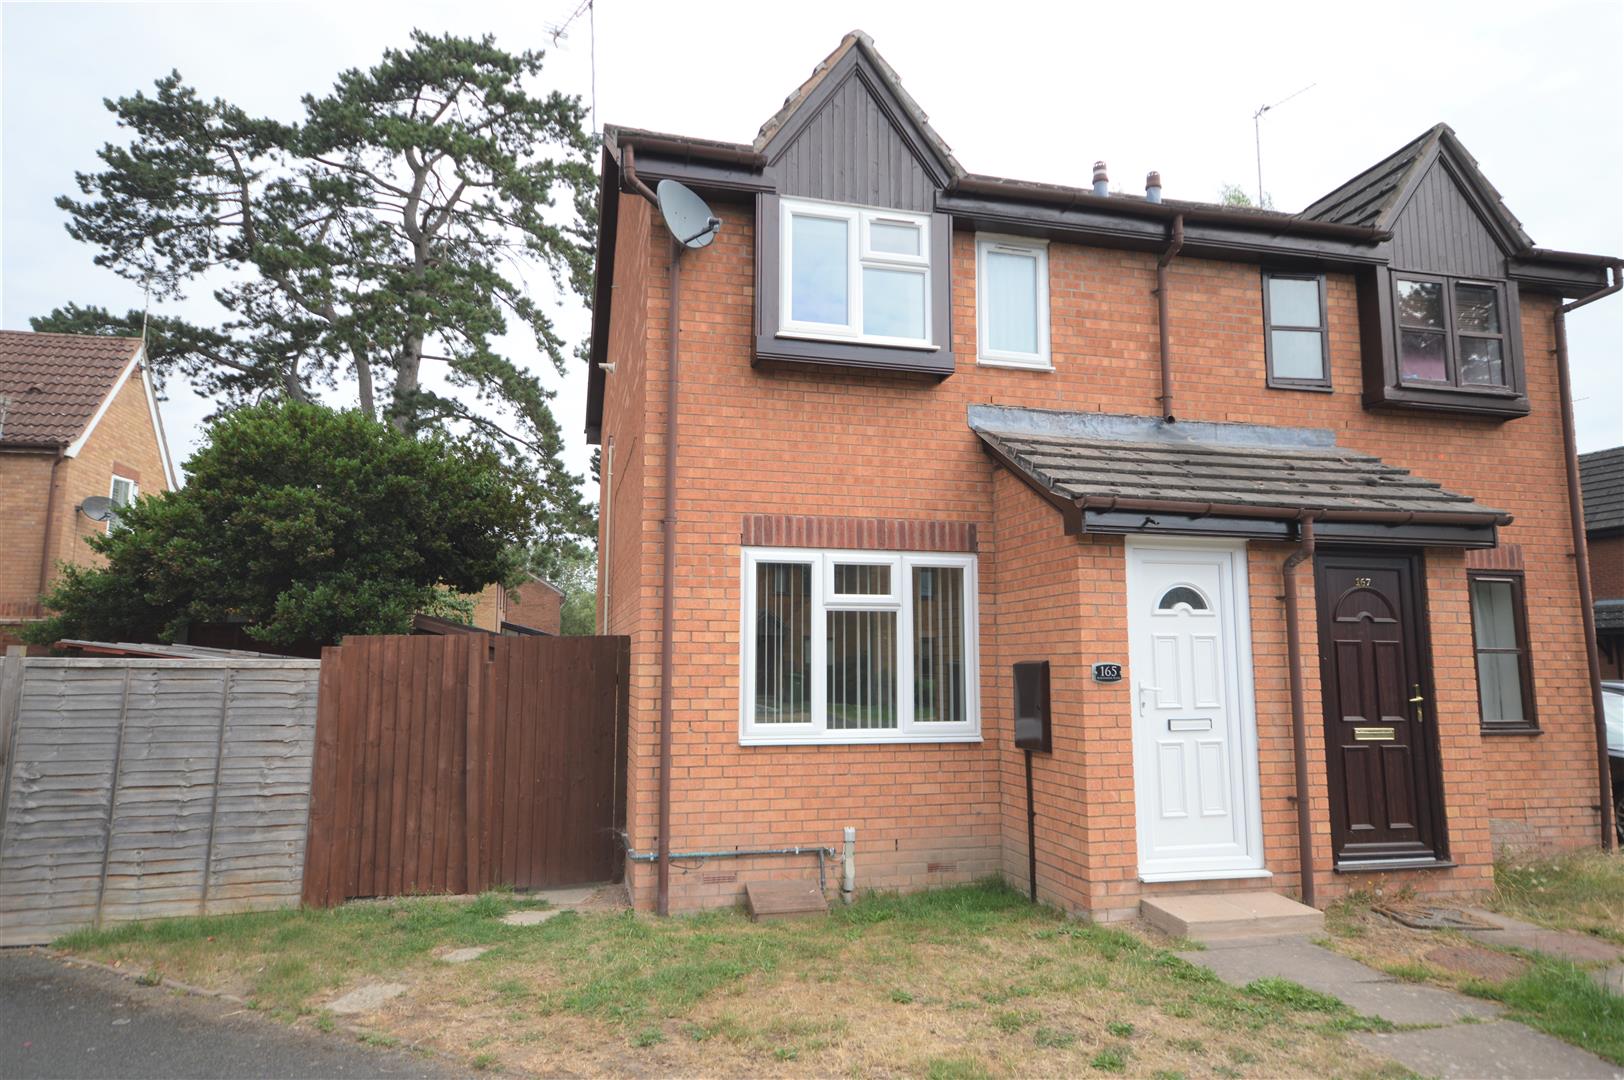 2 bed semi-detached for sale in Leominster, HR6